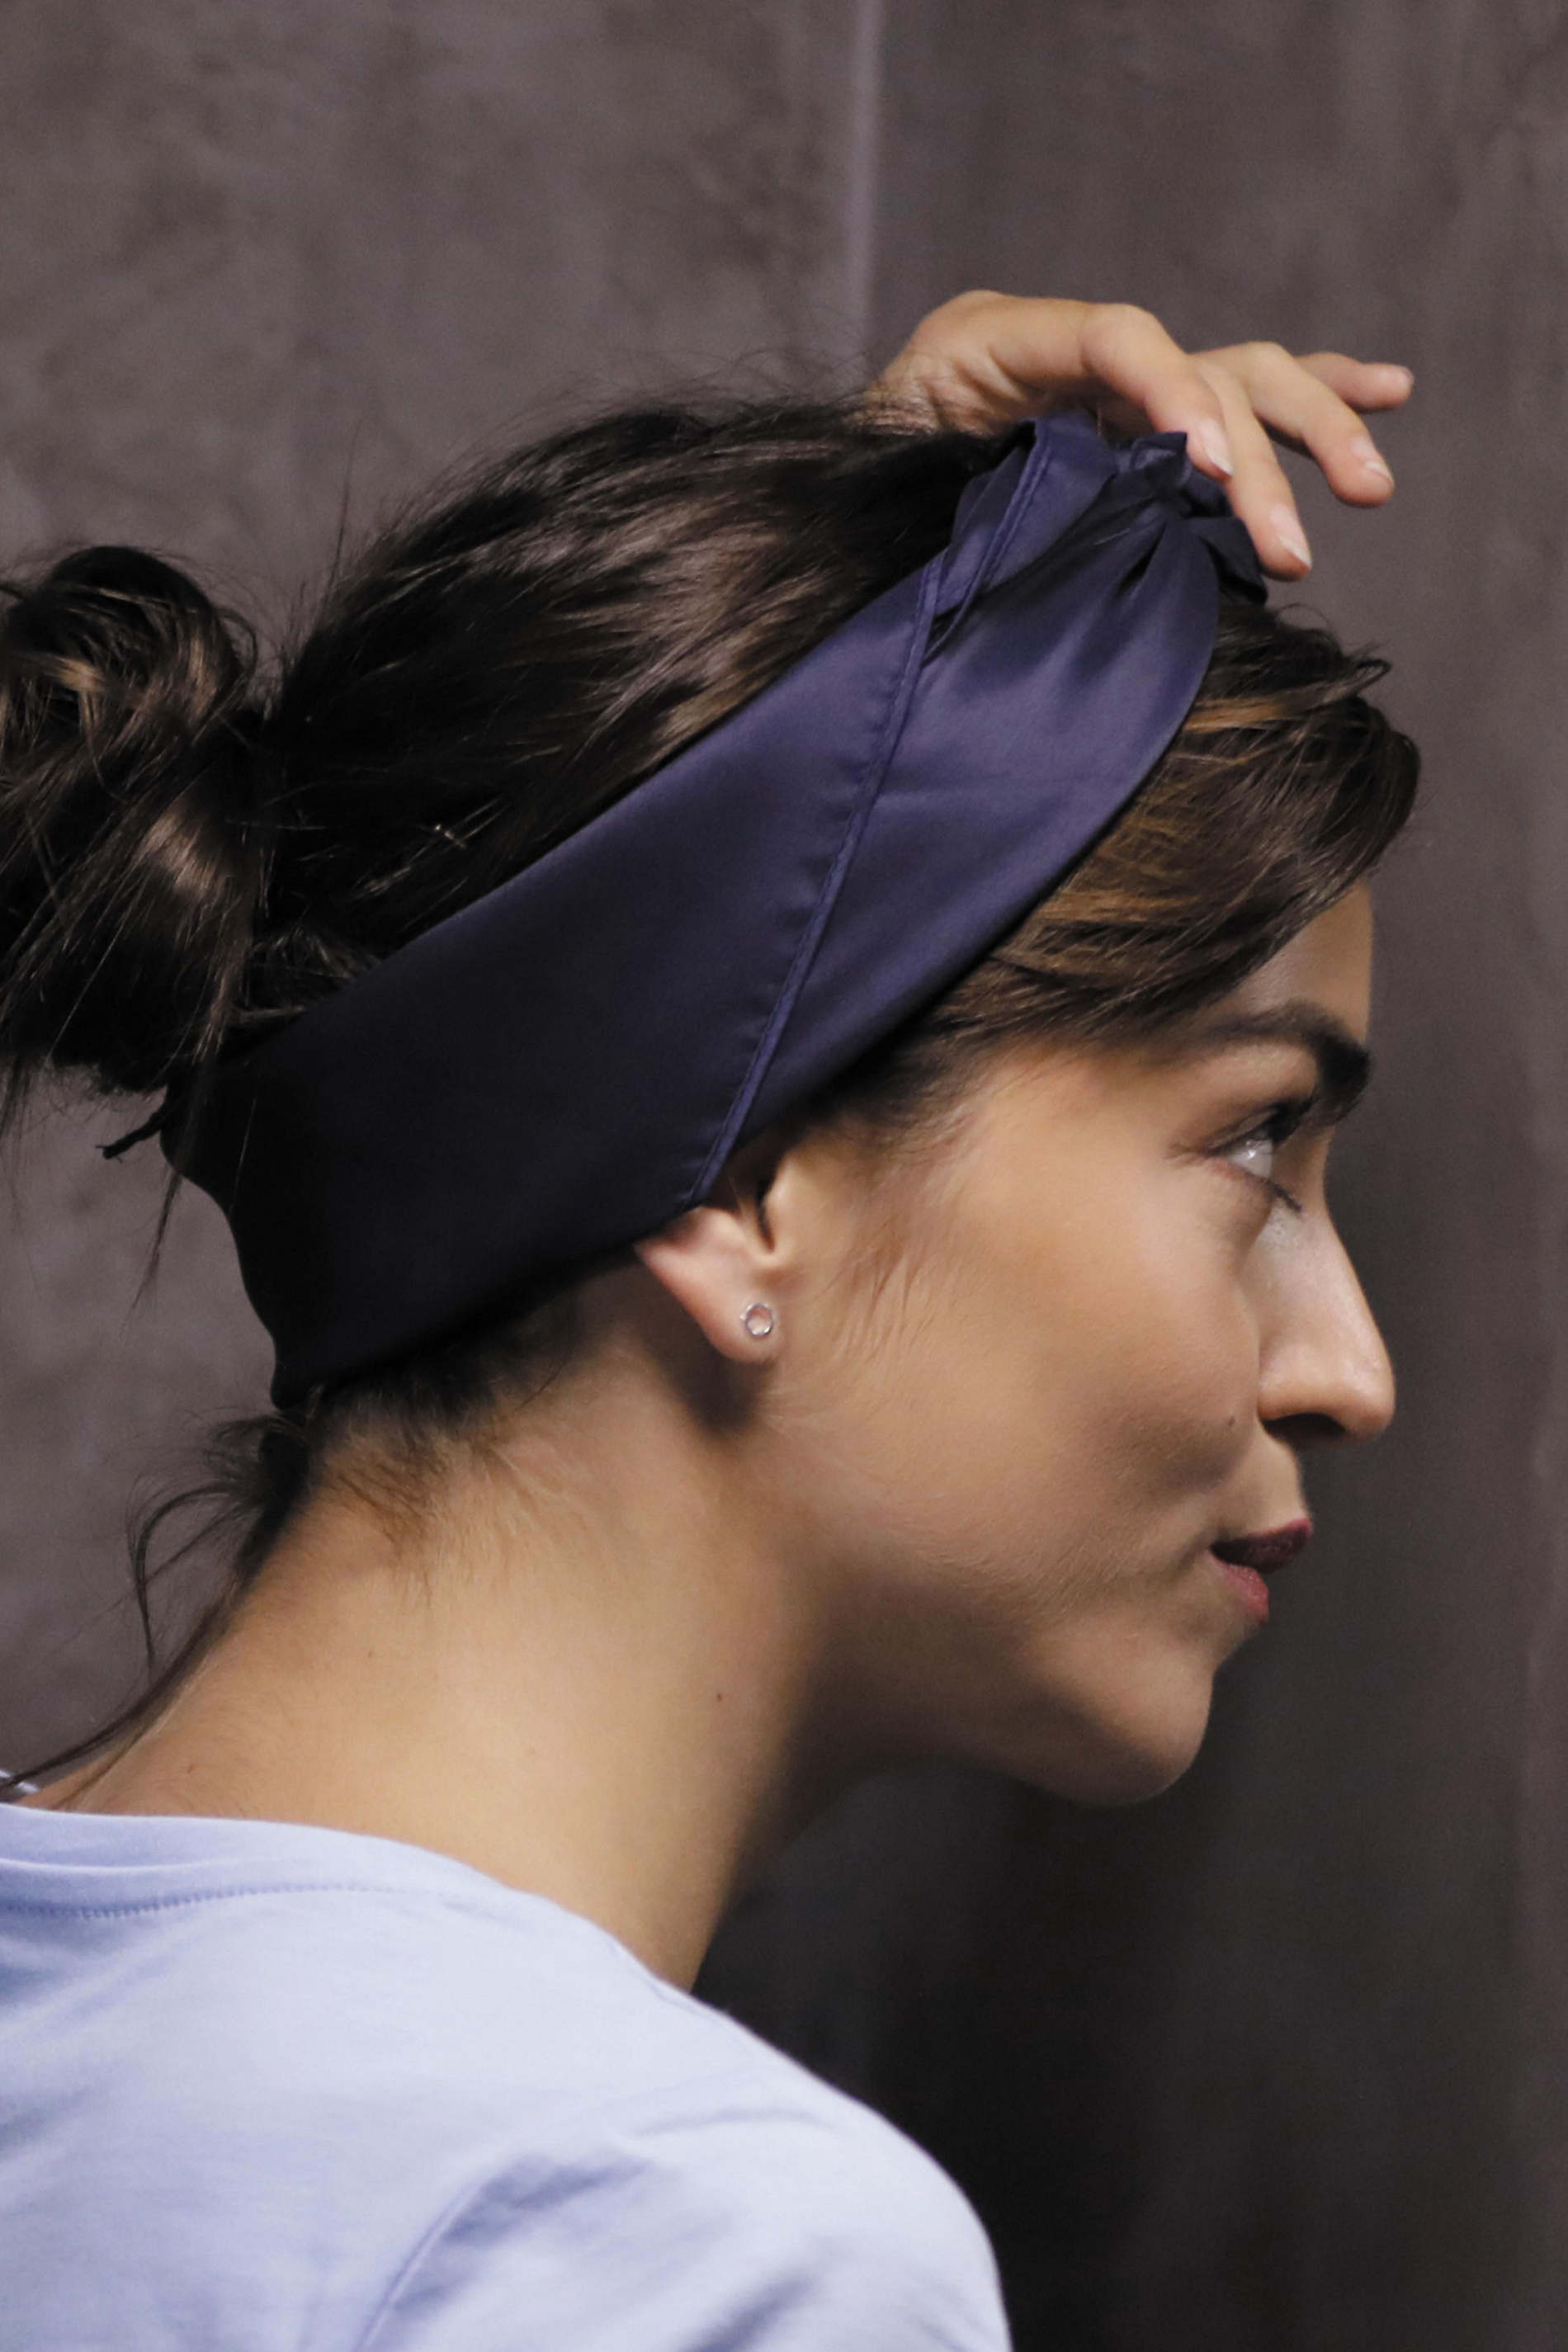 FOULARD<p>A timeless accessory of women’s wardrobe, the satin headscarf is a must-have that can be worn around the neck, as a belt or tied up in your hair.</p> NEOBLU TARA